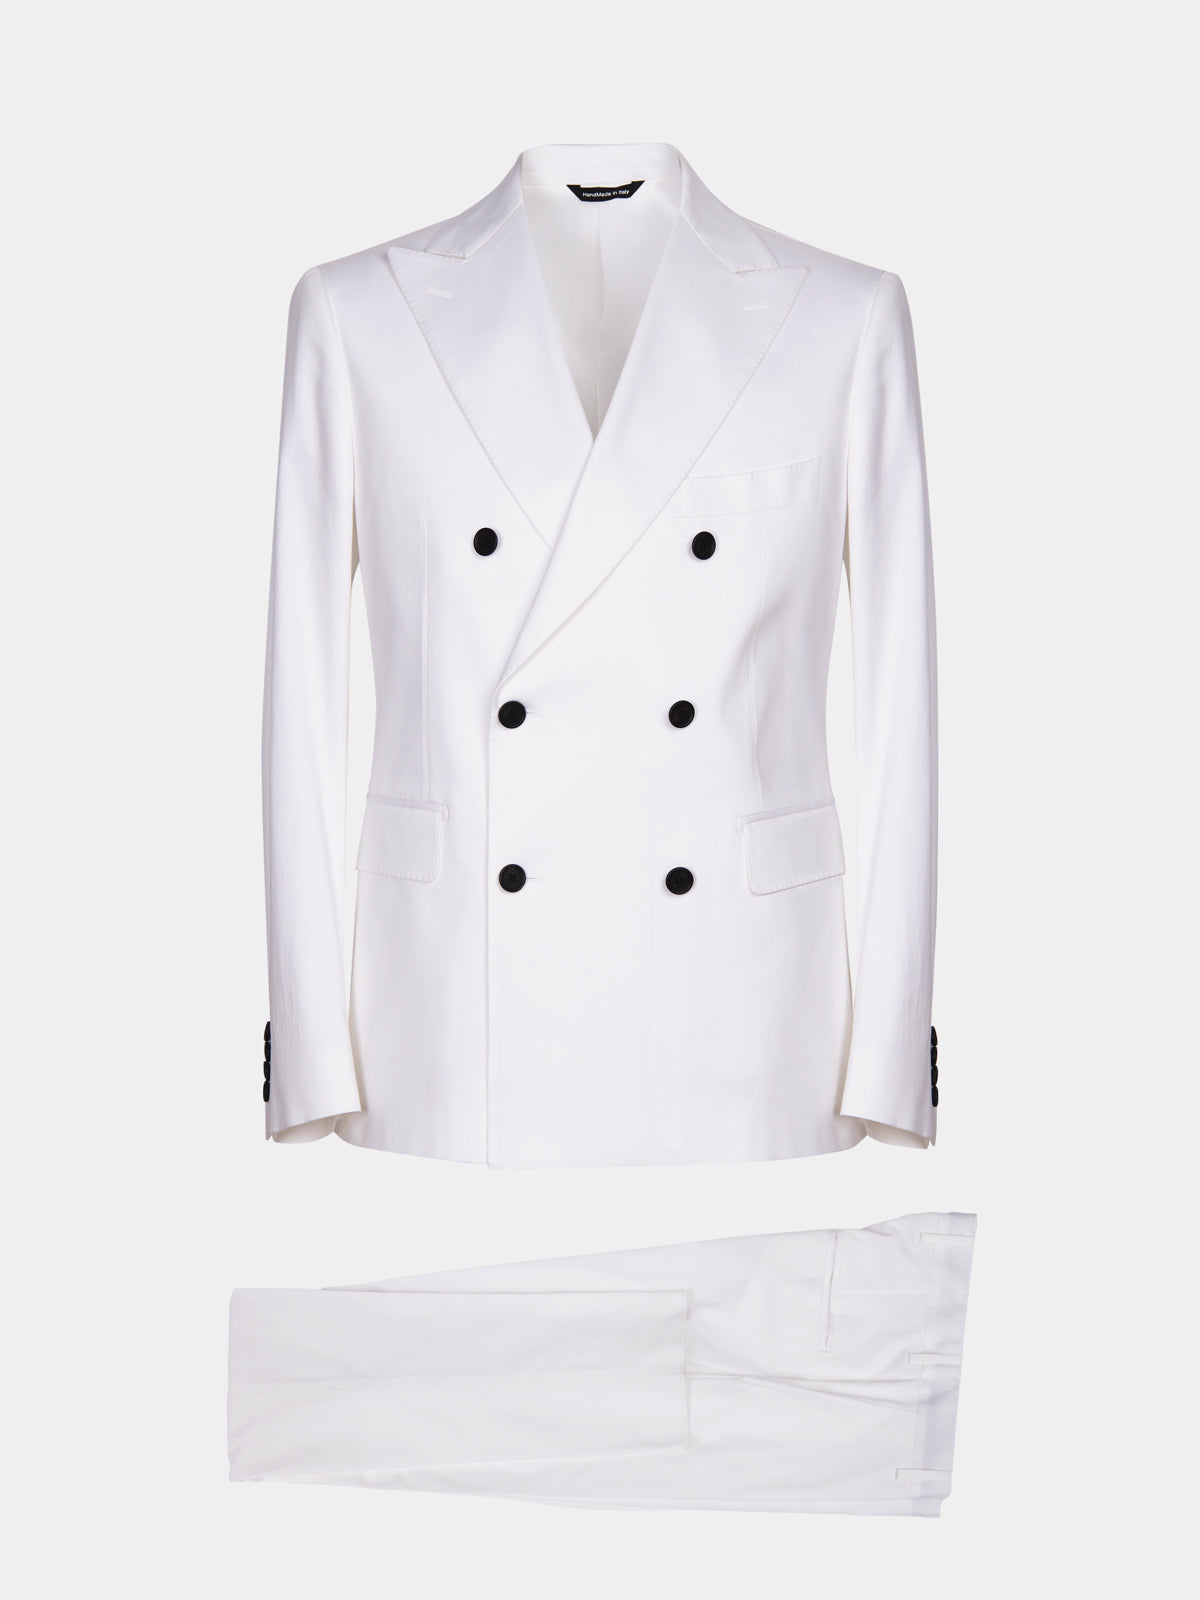 Double-breasted suit in white cotton satin